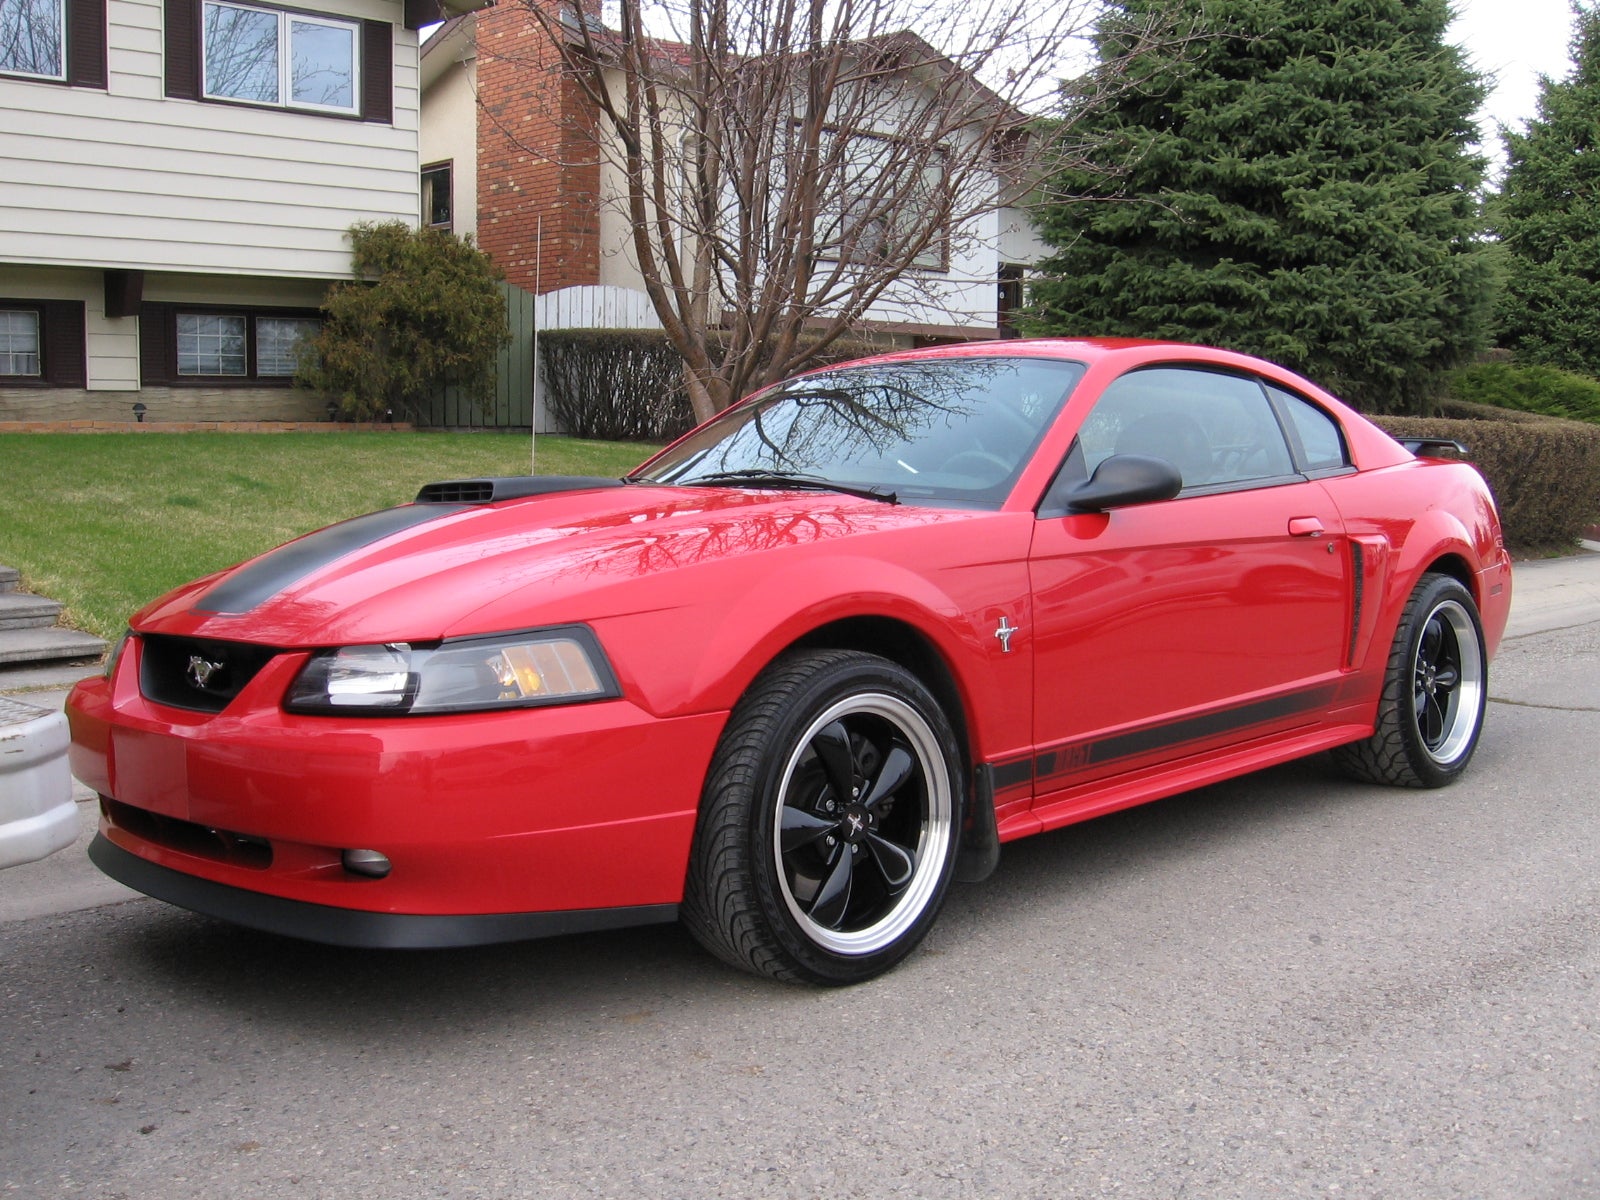 2003 Ford Mustang - Exterior Pictures - CarGurus